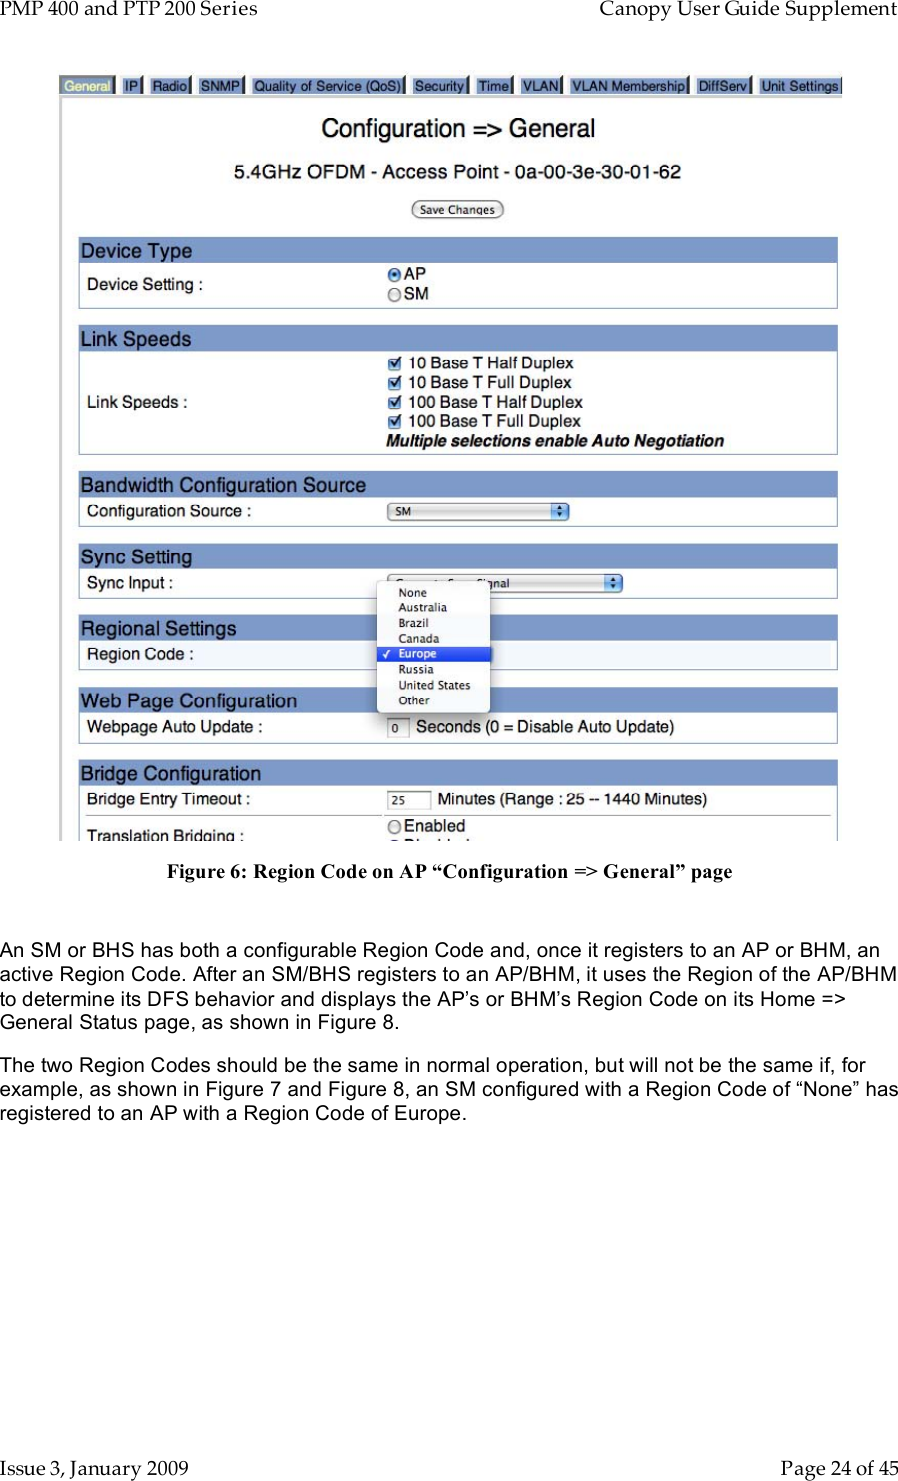 PMP 400 and PTP 200 Series   Canopy User Guide Supplement Issue 3, January 2009    Page 24 of 45  Figure 6: Region Code on AP “Configuration =&gt; General” page  An SM or BHS has both a configurable Region Code and, once it registers to an AP or BHM, an active Region Code. After an SM/BHS registers to an AP/BHM, it uses the Region of the AP/BHM to determine its DFS behavior and displays the AP’s or BHM’s Region Code on its Home =&gt; General Status page, as shown in Figure 8. The two Region Codes should be the same in normal operation, but will not be the same if, for example, as shown in Figure 7 and Figure 8, an SM configured with a Region Code of “None” has registered to an AP with a Region Code of Europe.  